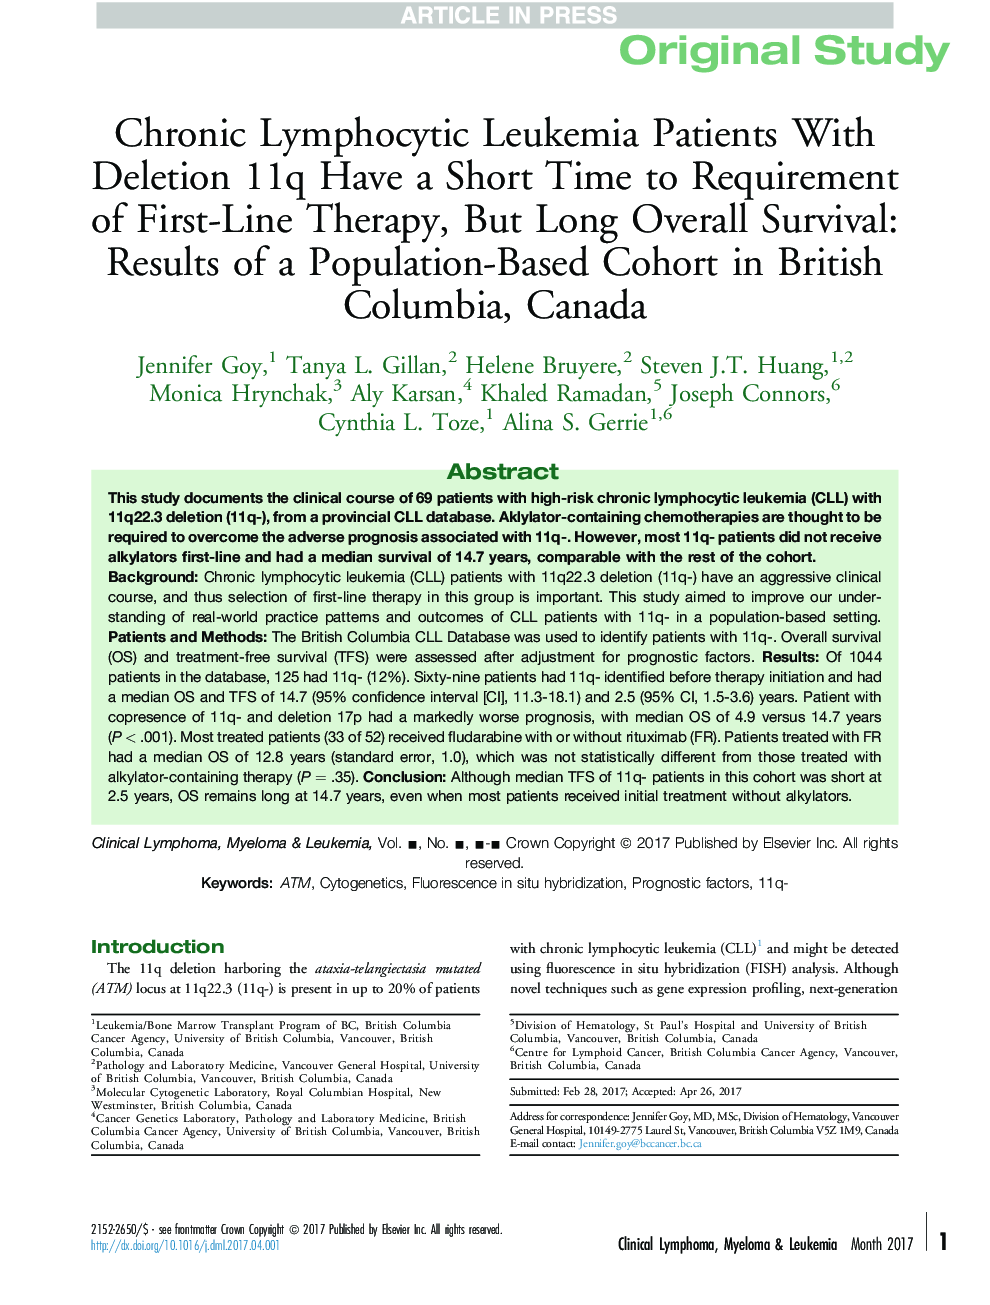 Chronic Lymphocytic Leukemia Patients With Deletion 11q Have a Short Time to Requirement of First-Line Therapy, But Long Overall Survival: Results of a Population-Based Cohort in British Columbia, Canada